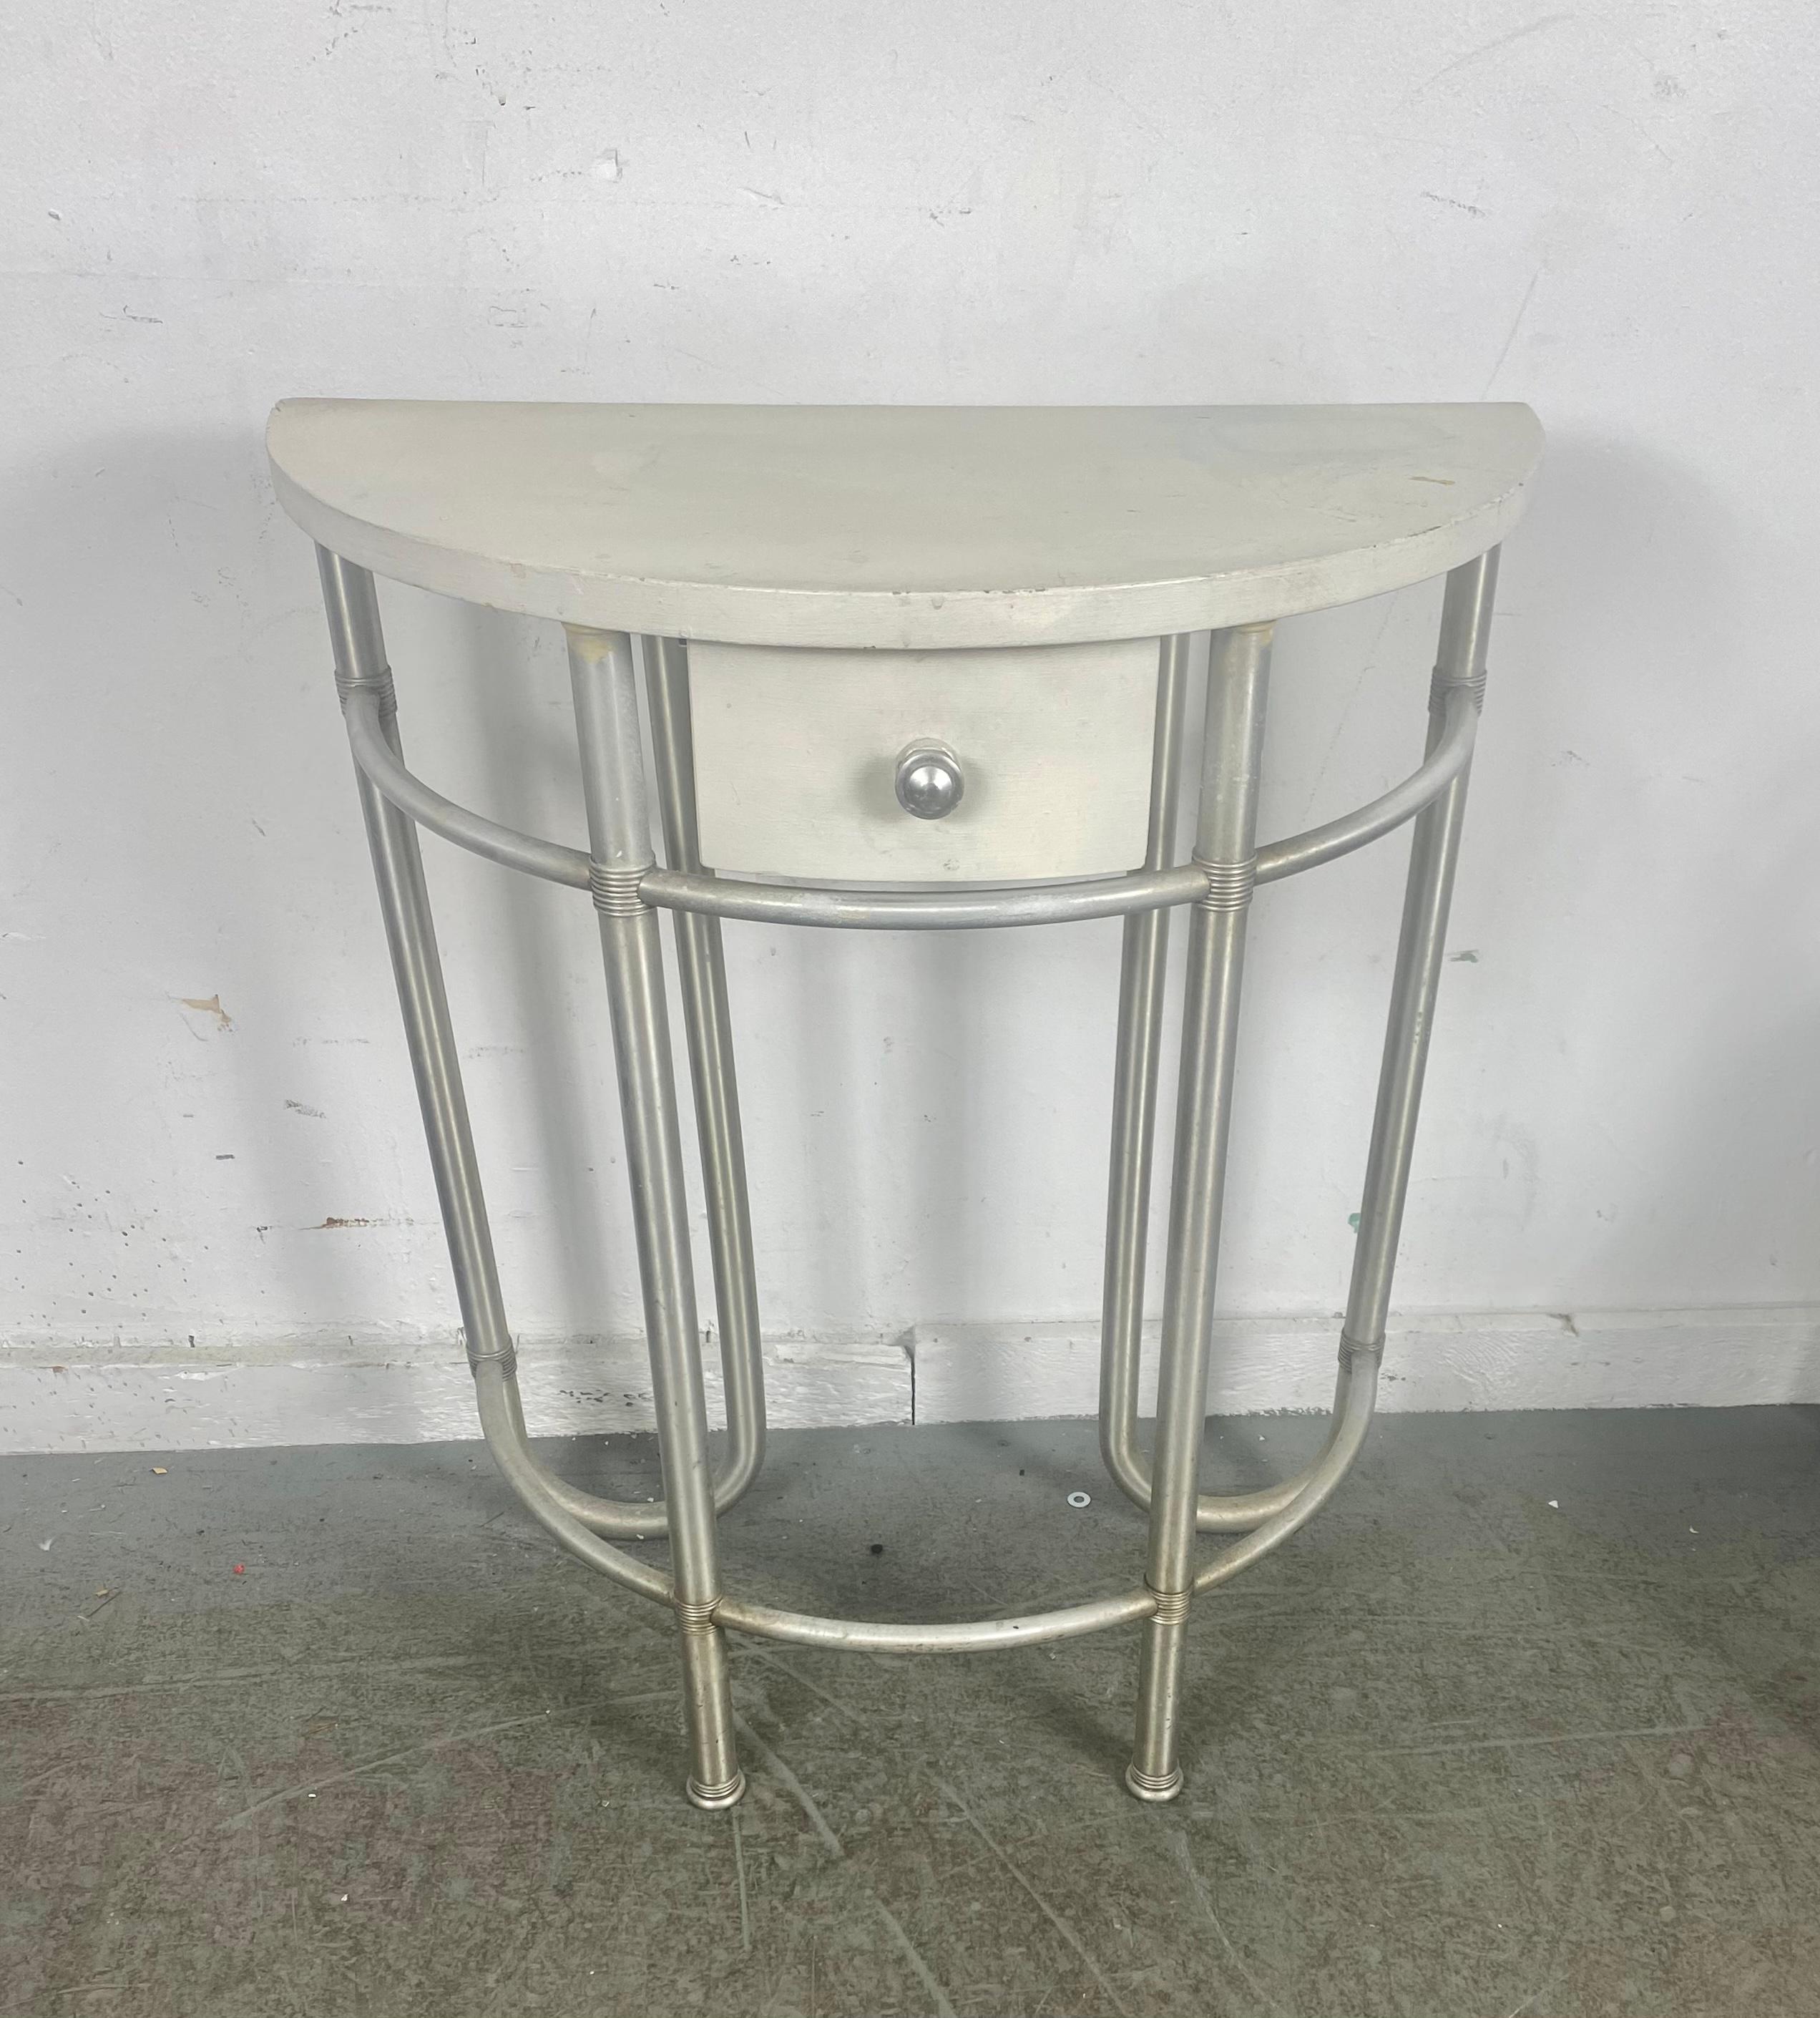 Extremely rare demilune console table designed by Warren McArthur. Amazing design, proportion, table has been re-painted (at some point) Retains remnants of original label, Also original pale yellow color under top. Aluminum frame in nice original